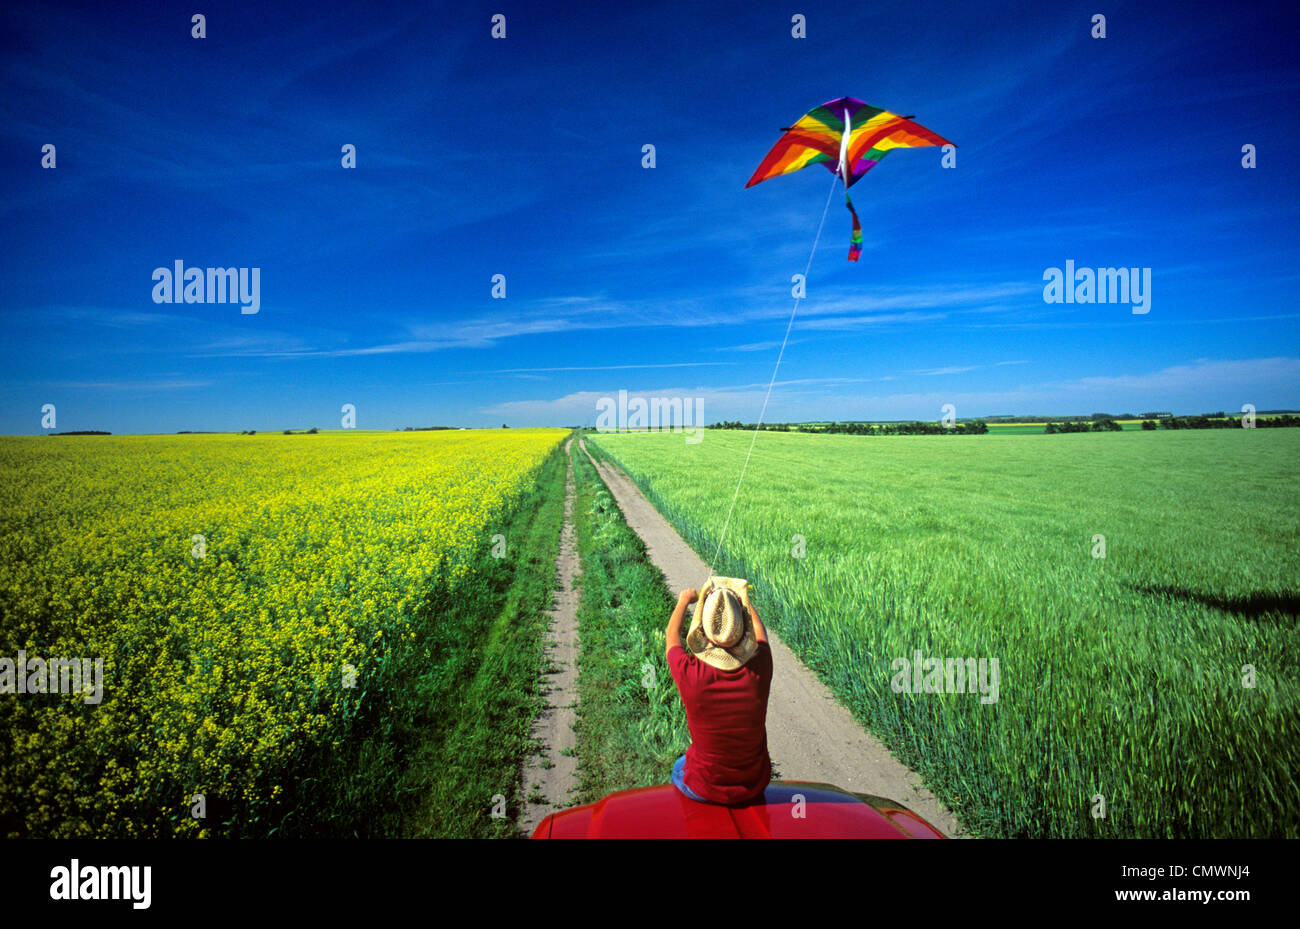 Girl Flying a Kite while Sitting on a Truck, Fields of Barley and Canola in the background, near Somerset, Manitoba Stock Photo